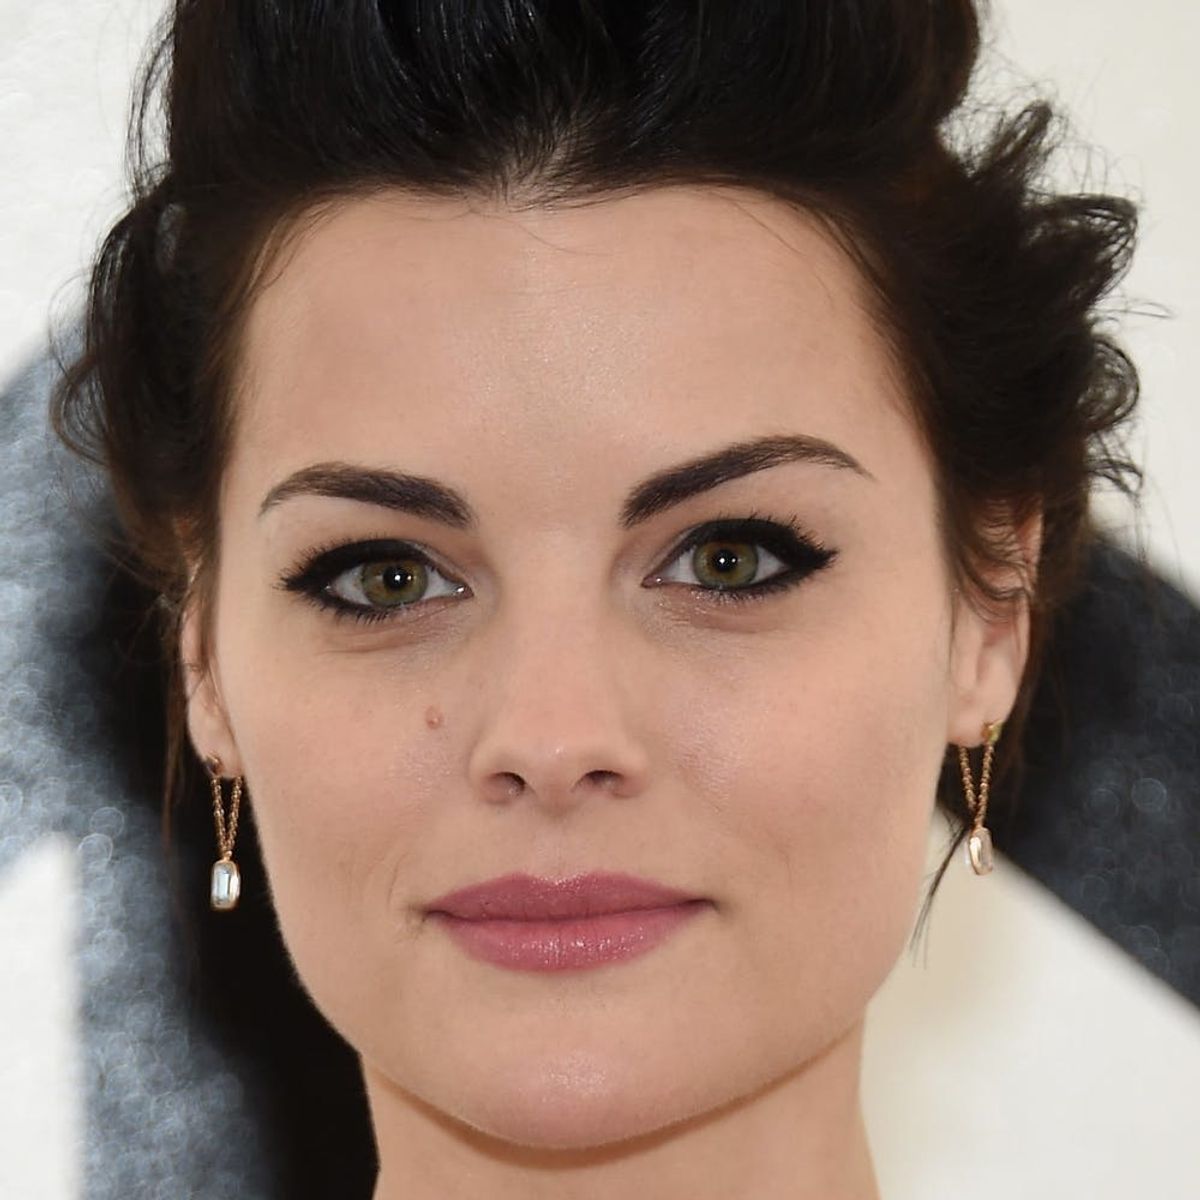 Why ‘Blindspot’ Star Jaimie Alexander Spent the Weekend in the Hospital